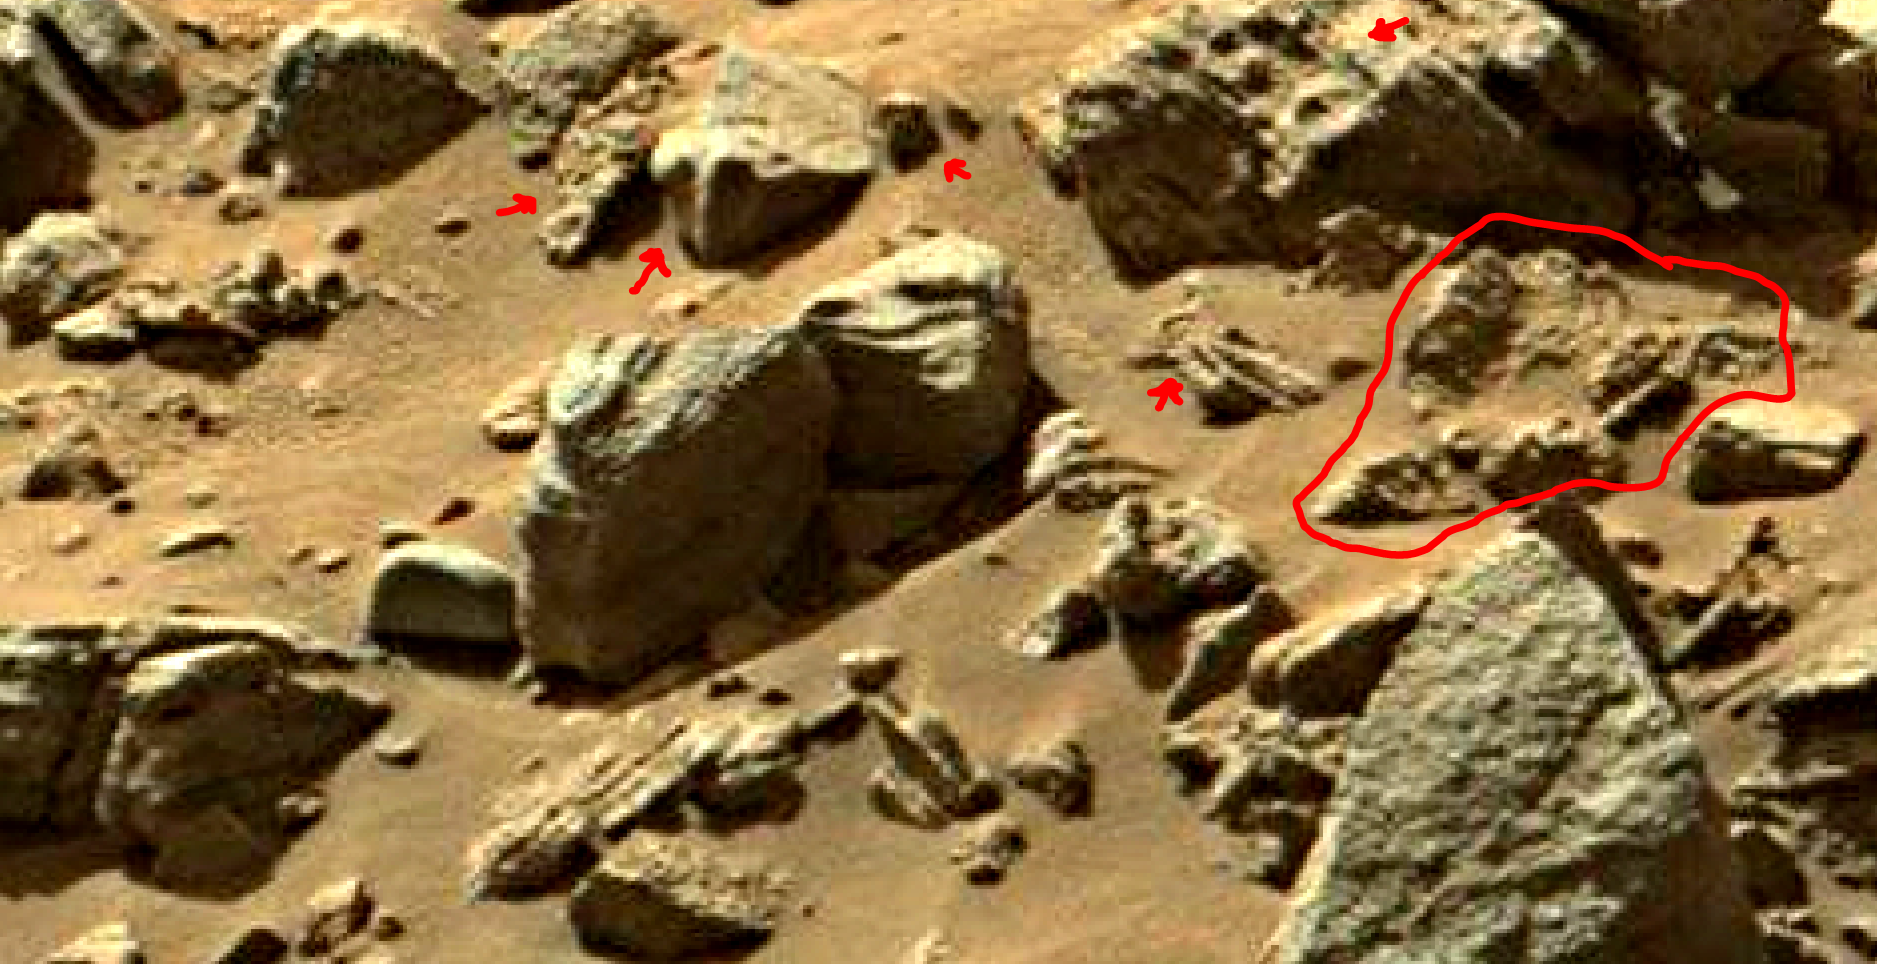 mars sol 1405 anomaly artifacts 10 was life on mars